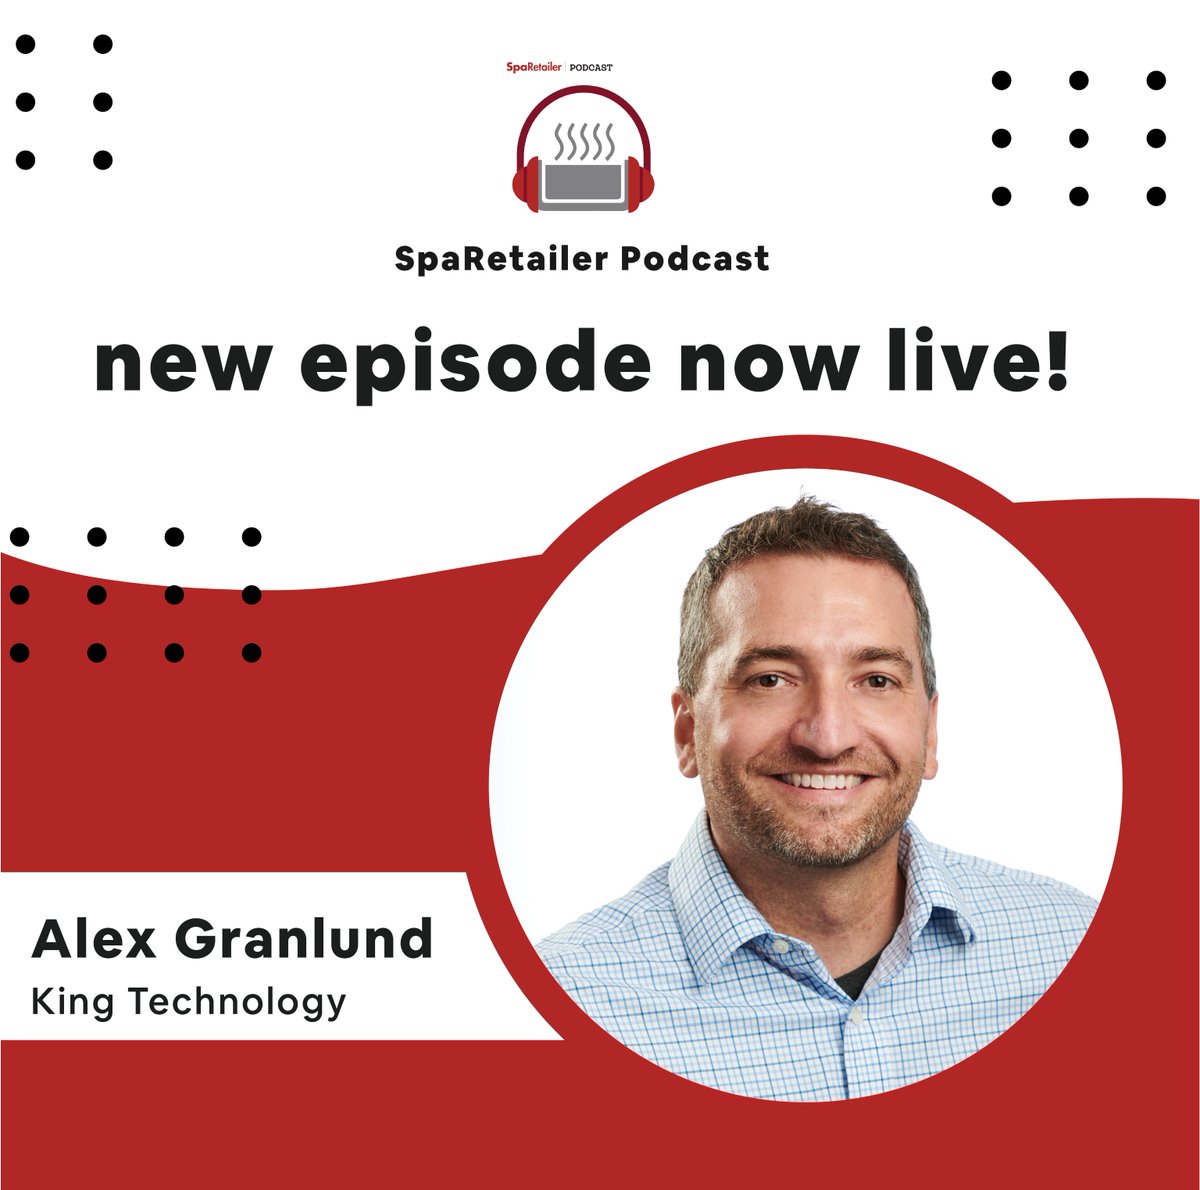 New Episode Alert! Episode #108 of the SpaRetailer Podcast is live! Hear from Alex Granlund with King Technology as he shares about the company’s latest innovation — FROG @ease for Swim Spas — and how products go from idea to creation.

Listen here: sparetailer.com/episode-108-al…